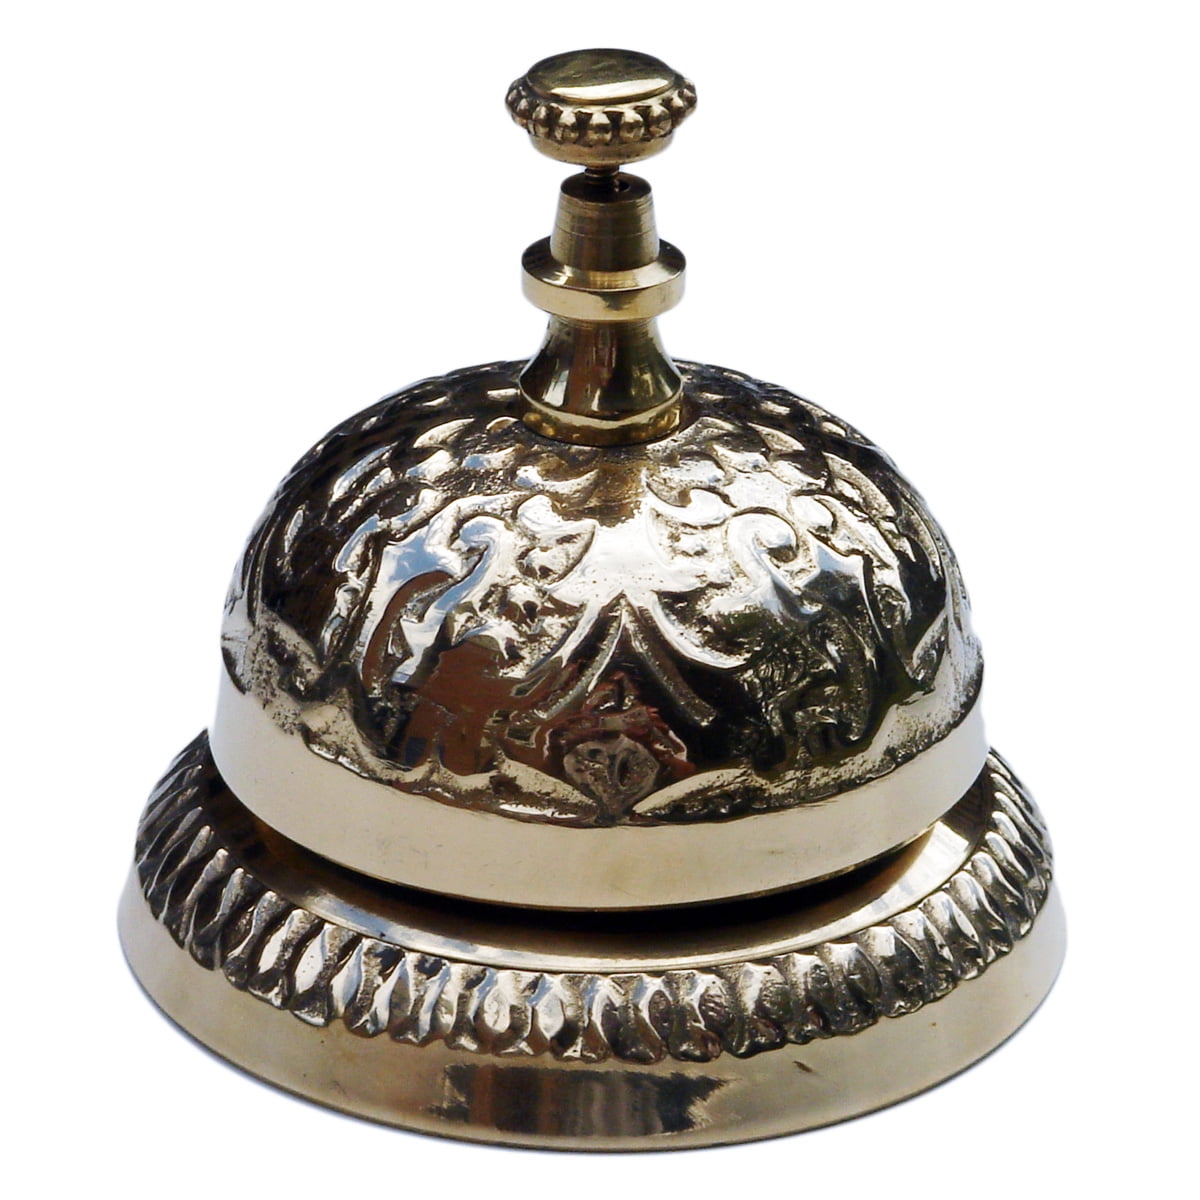 Brass nautical ornate desk bell table decor call bell reception ring bell gift 